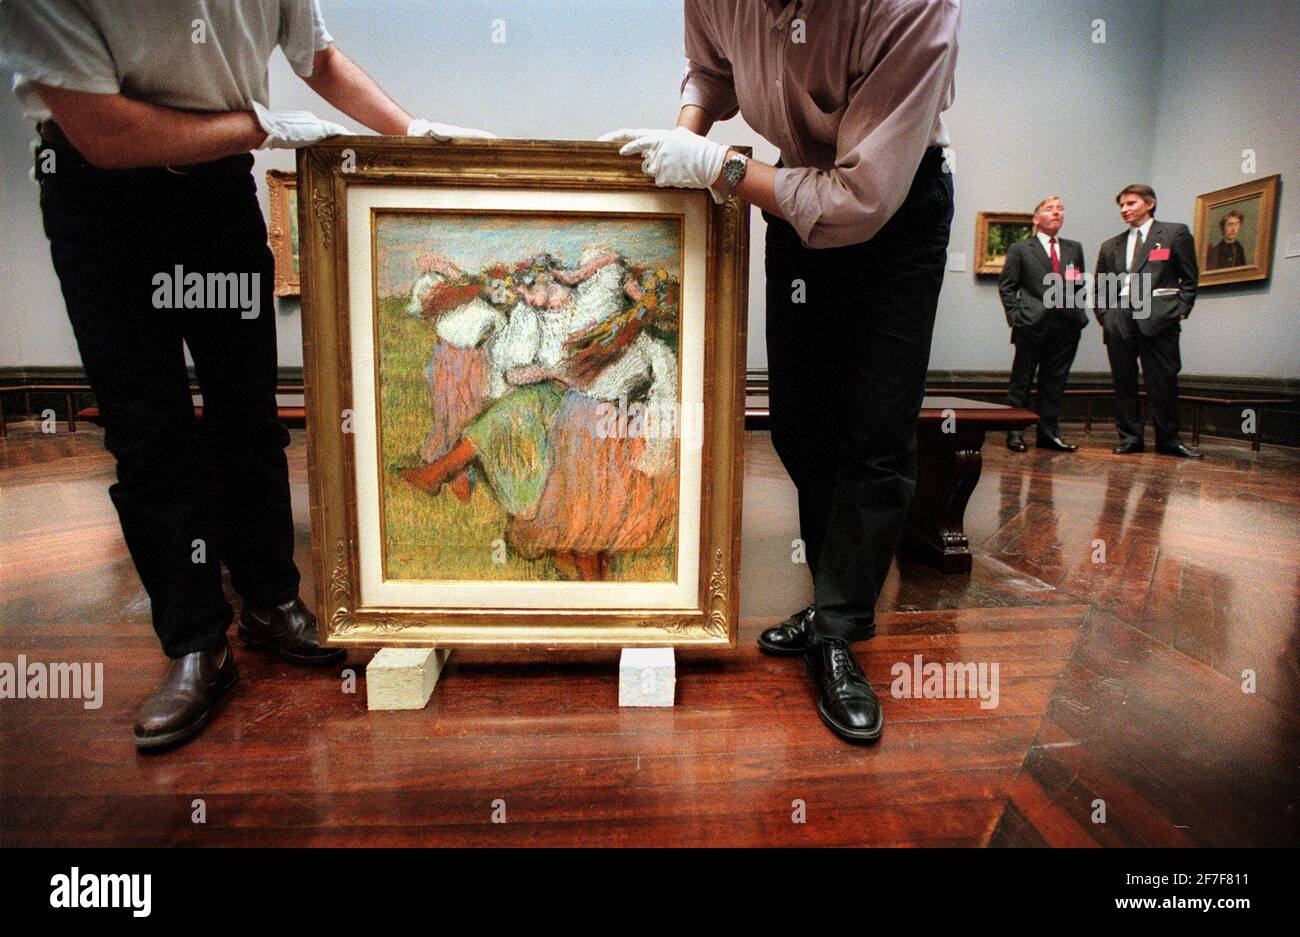 IMPRESSIONIST PAINTER OCTOBER 2000EDGAR DEGAS'S 'RUSSIAN DANCERS' OF ABOUT 1899 HAS BEEN GIVEN TO THE NATIONAL GALLERY AS A GIFT FROM THE SARA LEE CORPORATION Stock Photo